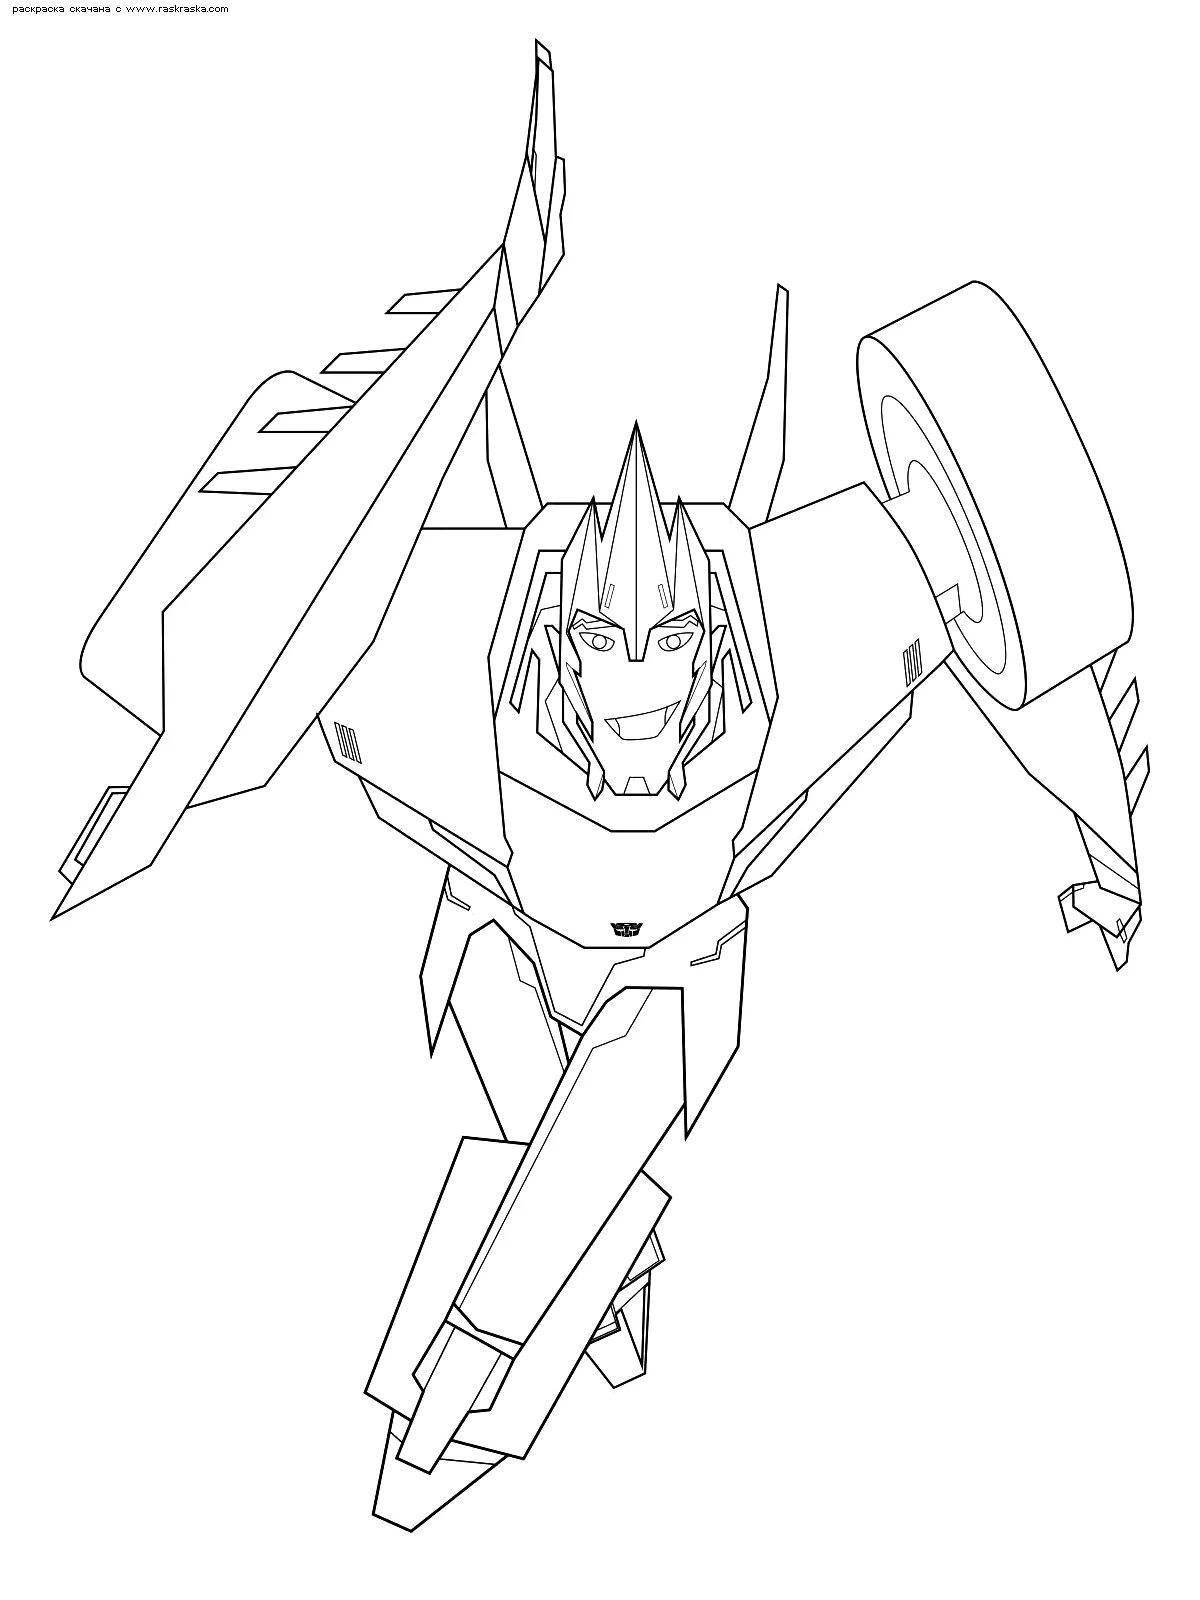 Exquisite coloring pages sideswipe transformers